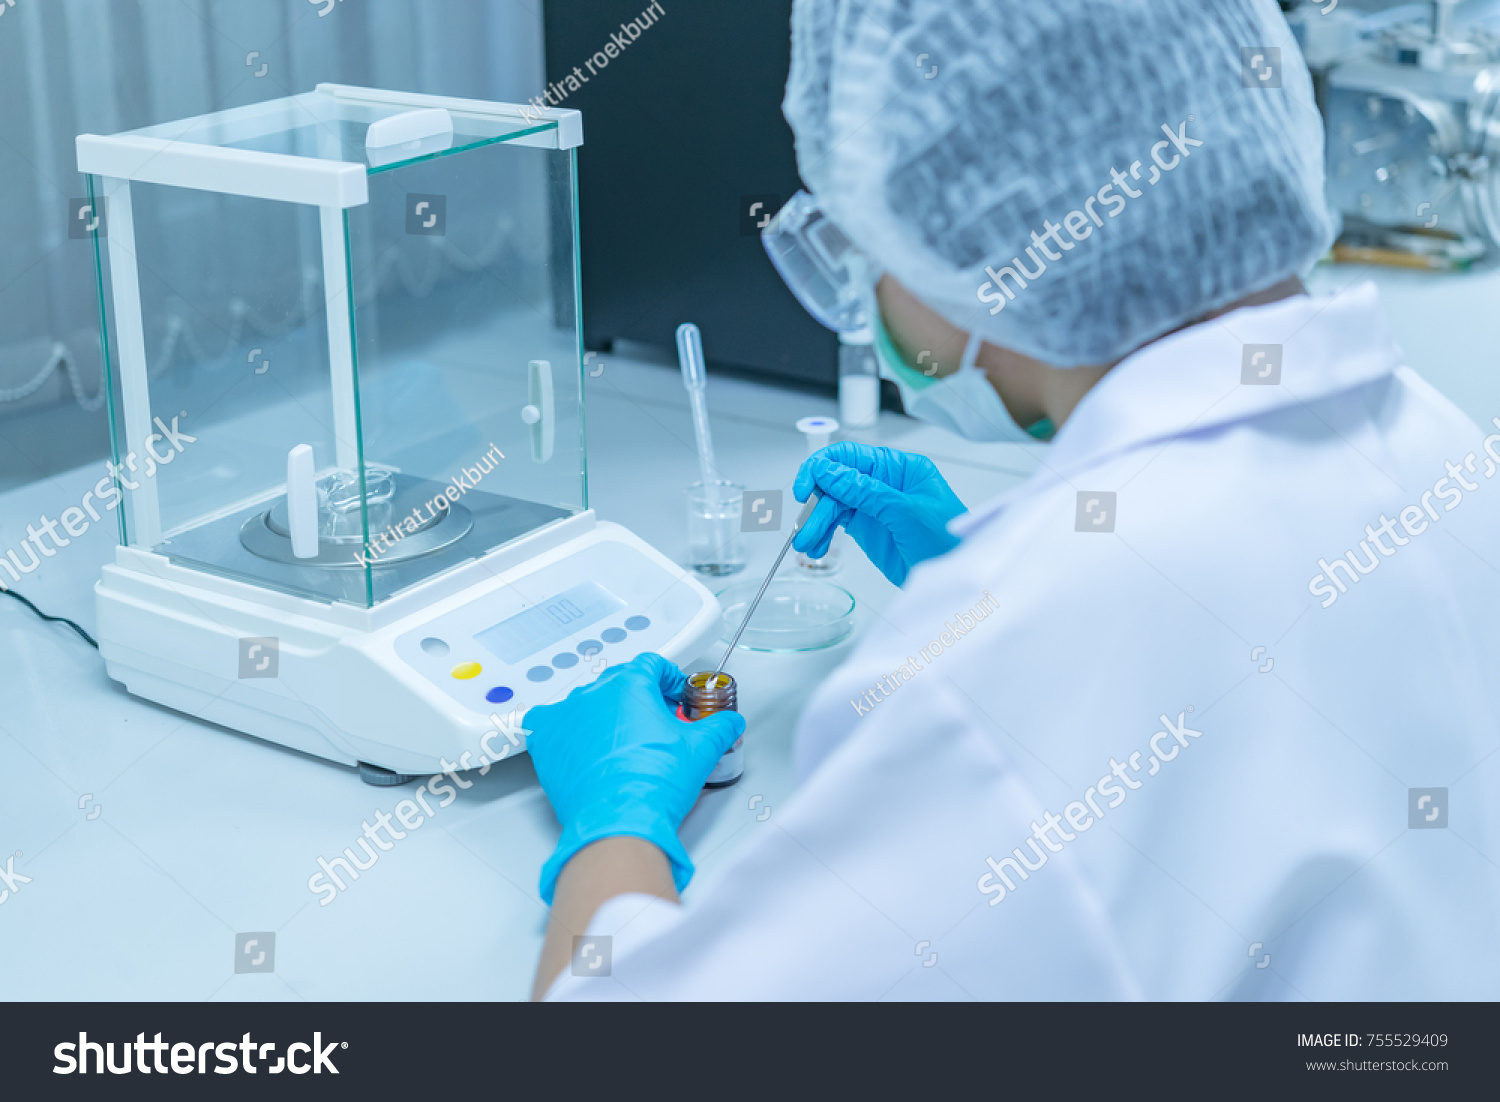 The scientists injected chemicals into plastic tubes,Scientist mix chemicals with The shake machine Before the experiment.Mixture laced with samples into test tubes,prepare sample for test #755529409